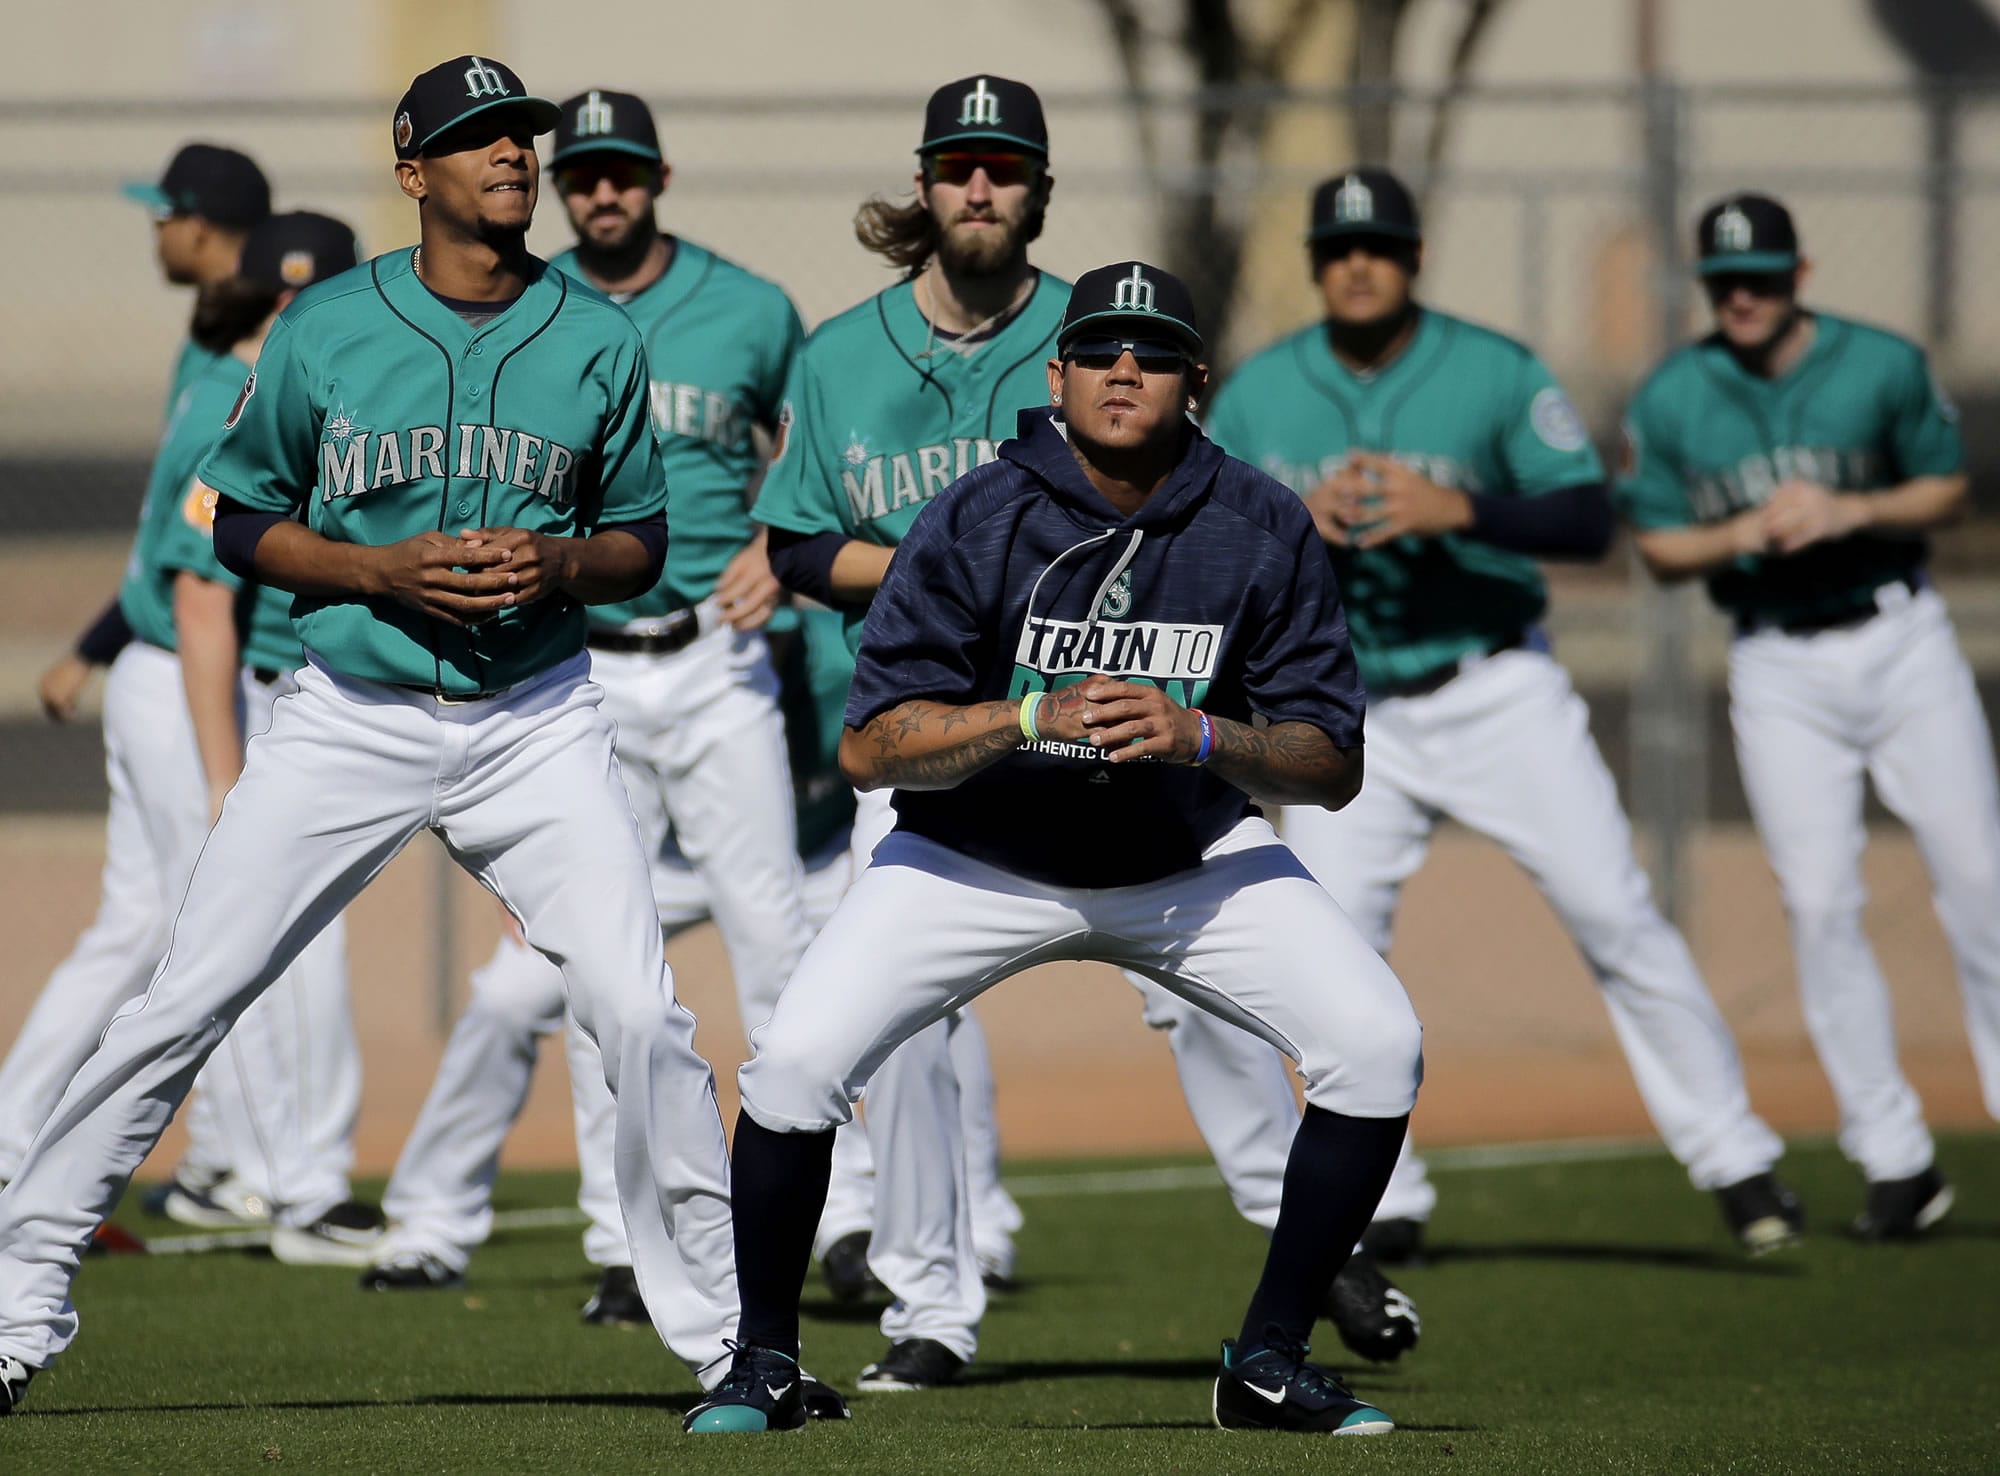 Mariners adopt 'Whatever It Takes' mantra for season - The Columbian